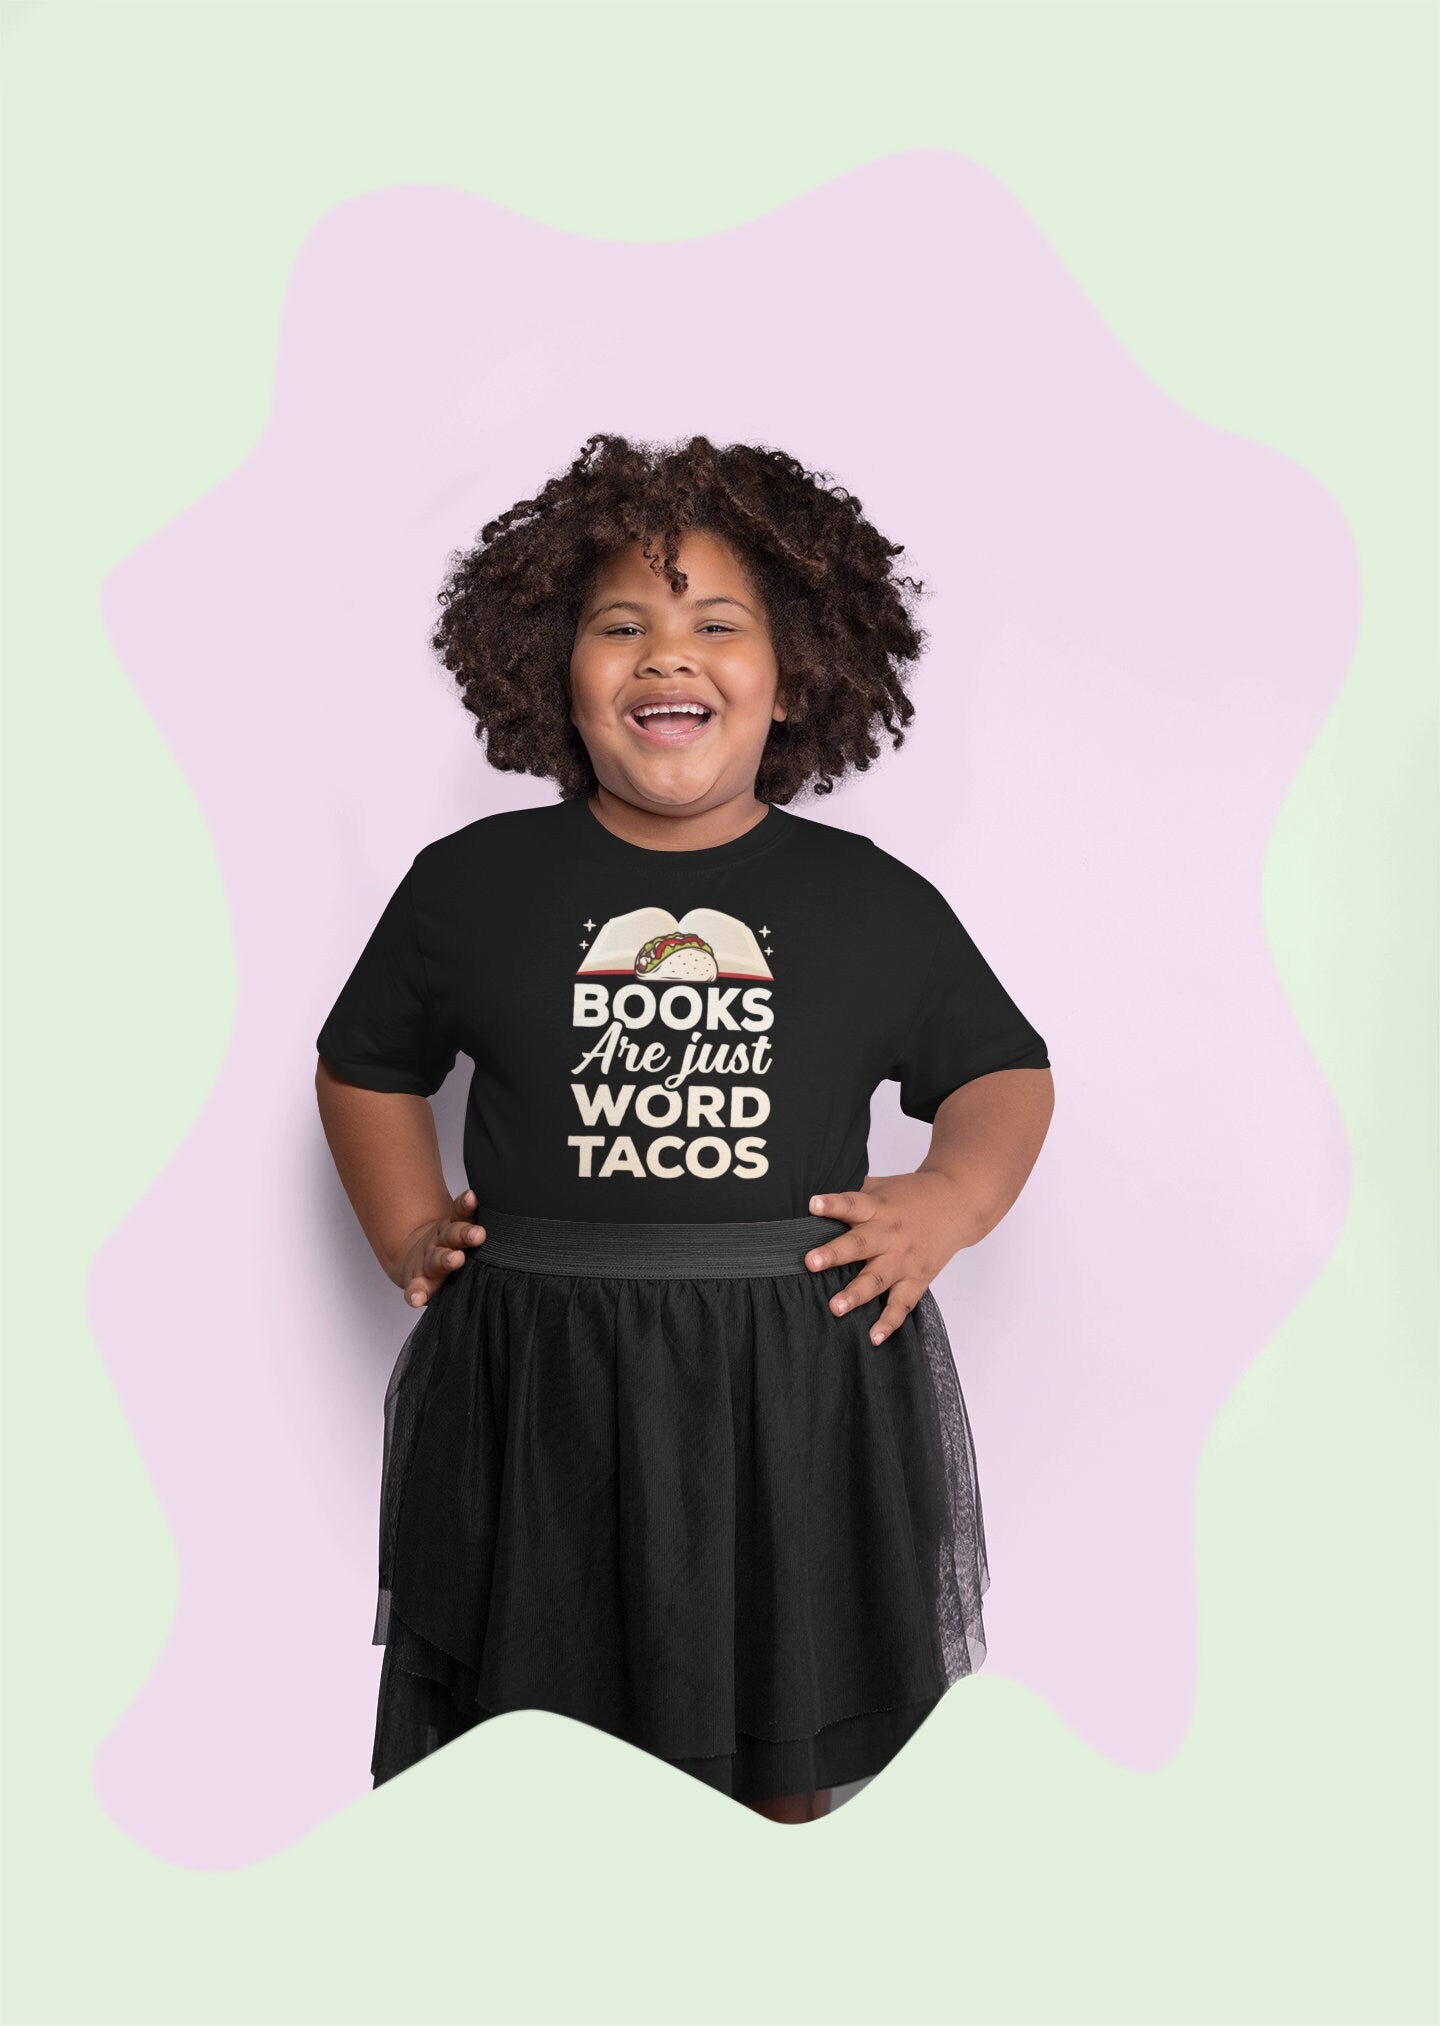 Books Are Just Word Tacos Shirt, Book Lover Shirt, Bookish Shirt, Book Reading Shirt, Book Nerd Shirt